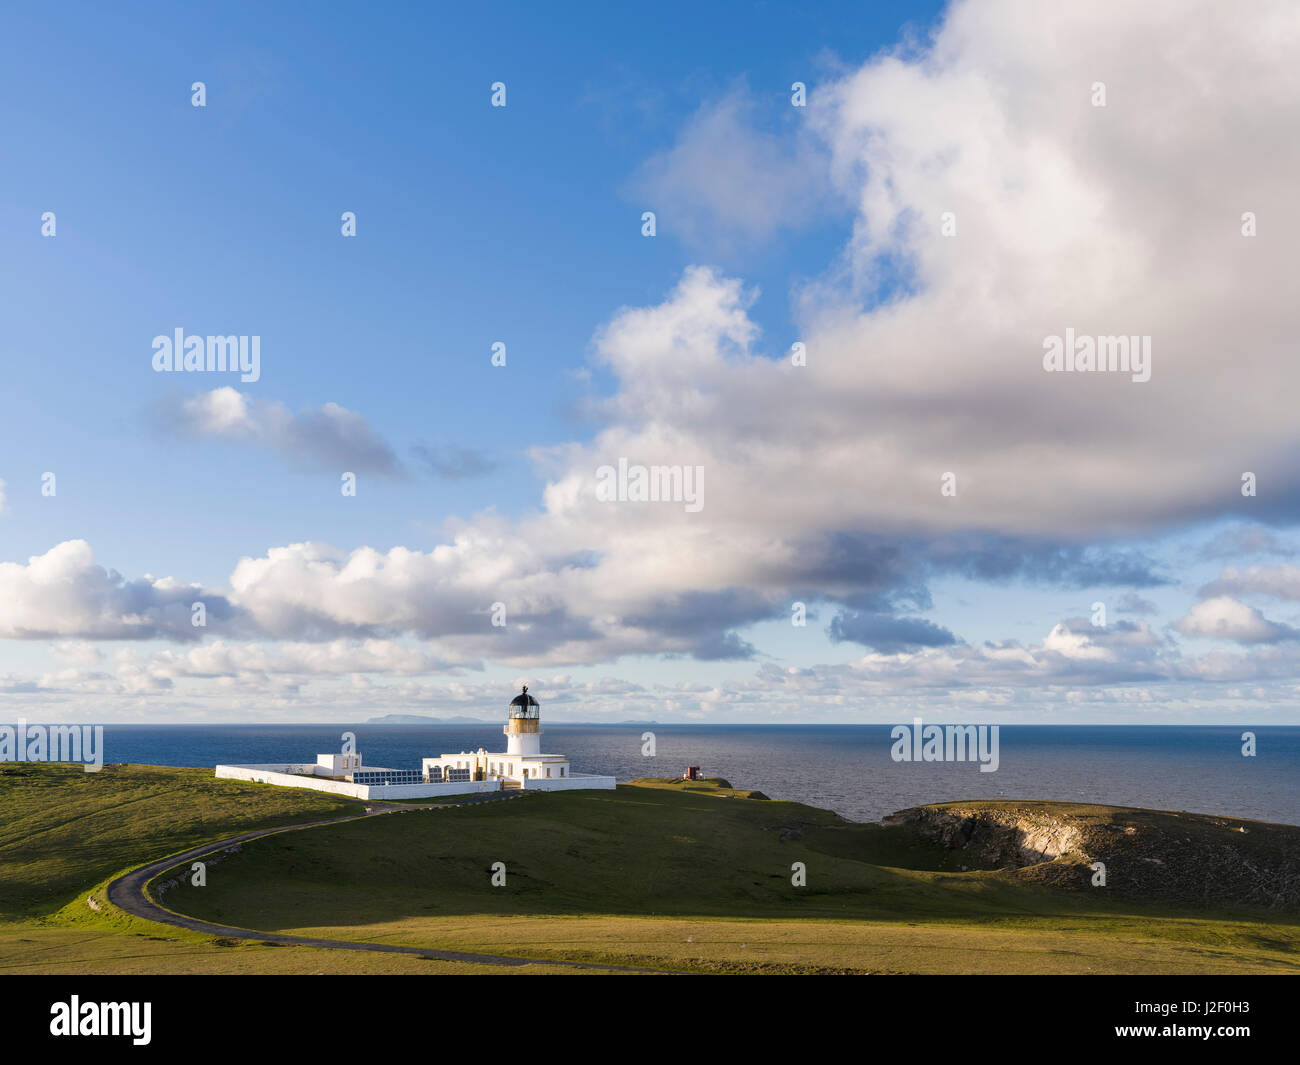 Fair Isle. in the far north of Scotland. North Lighthouse, built in 1892 by D and C Stevenson. Scotland, Shetland Islands (Large format sizes available) Stock Photo